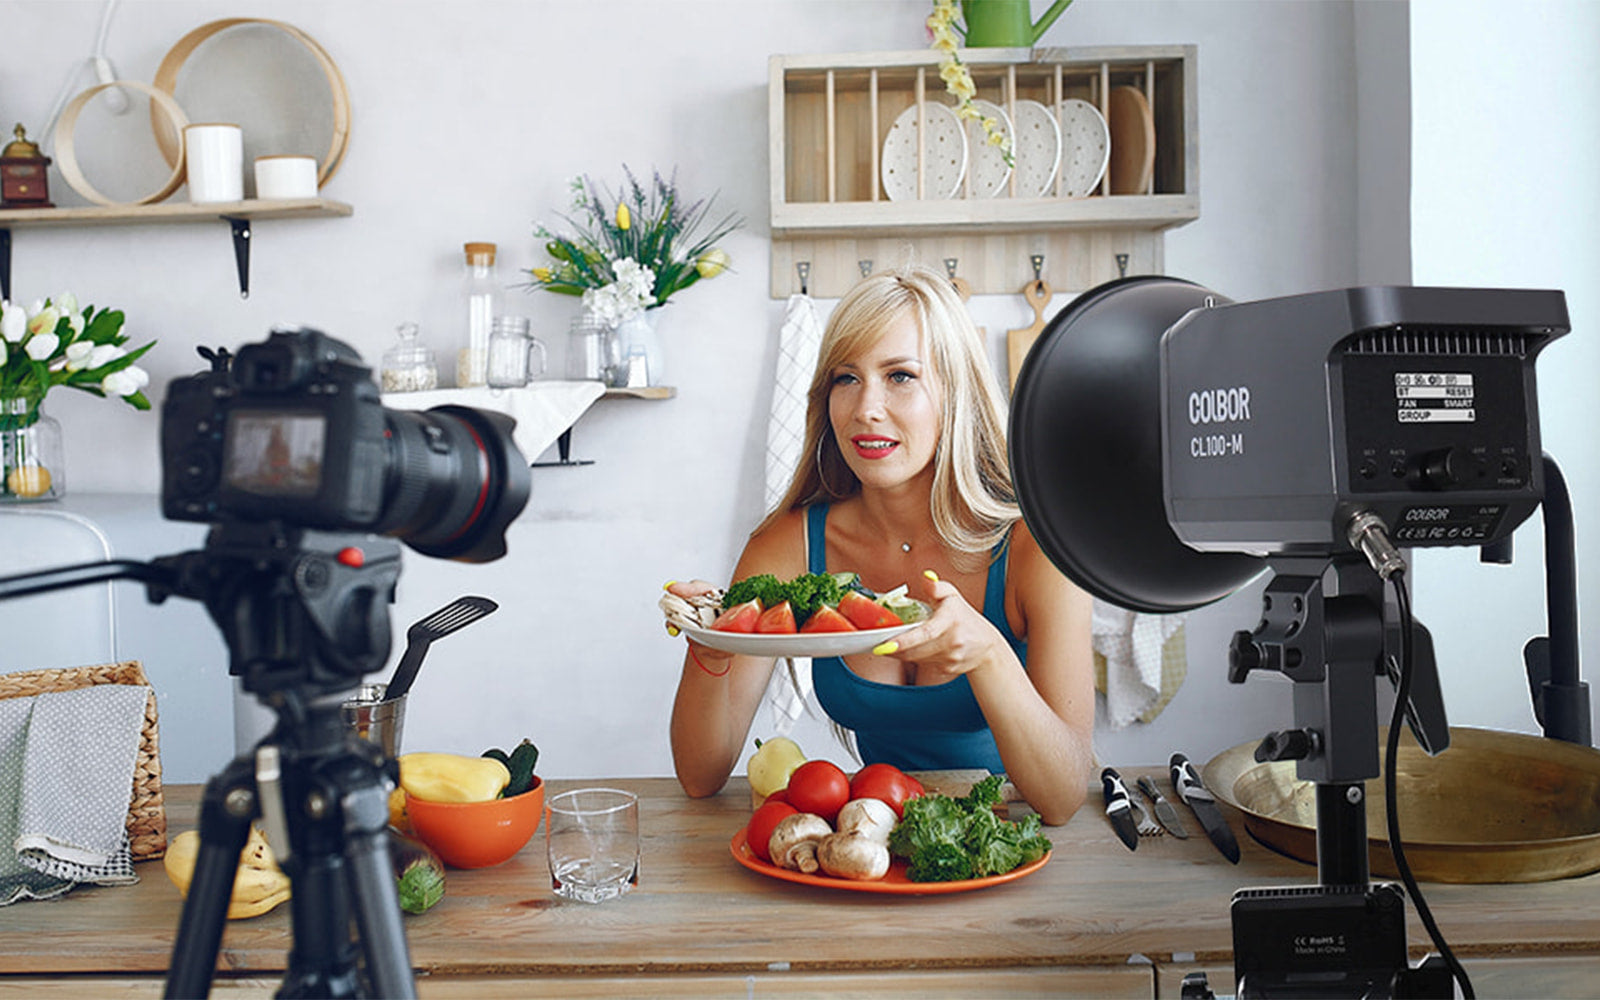 COLBOR CL100-M offers daylight balanced LED lighting for cooking videos.